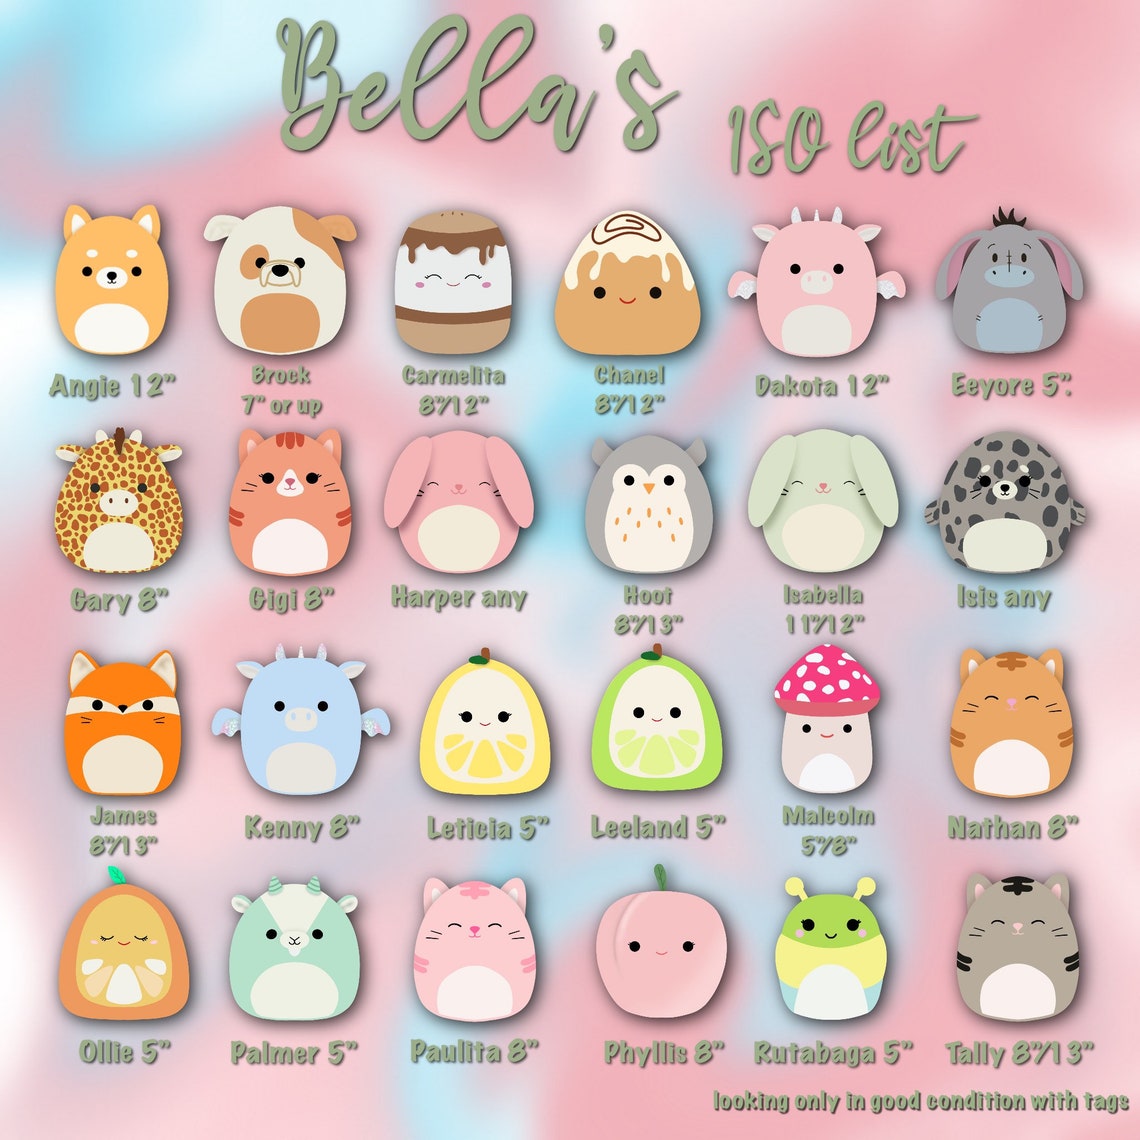 Squishmallows Names List With Pictures - www.inf-inet.com